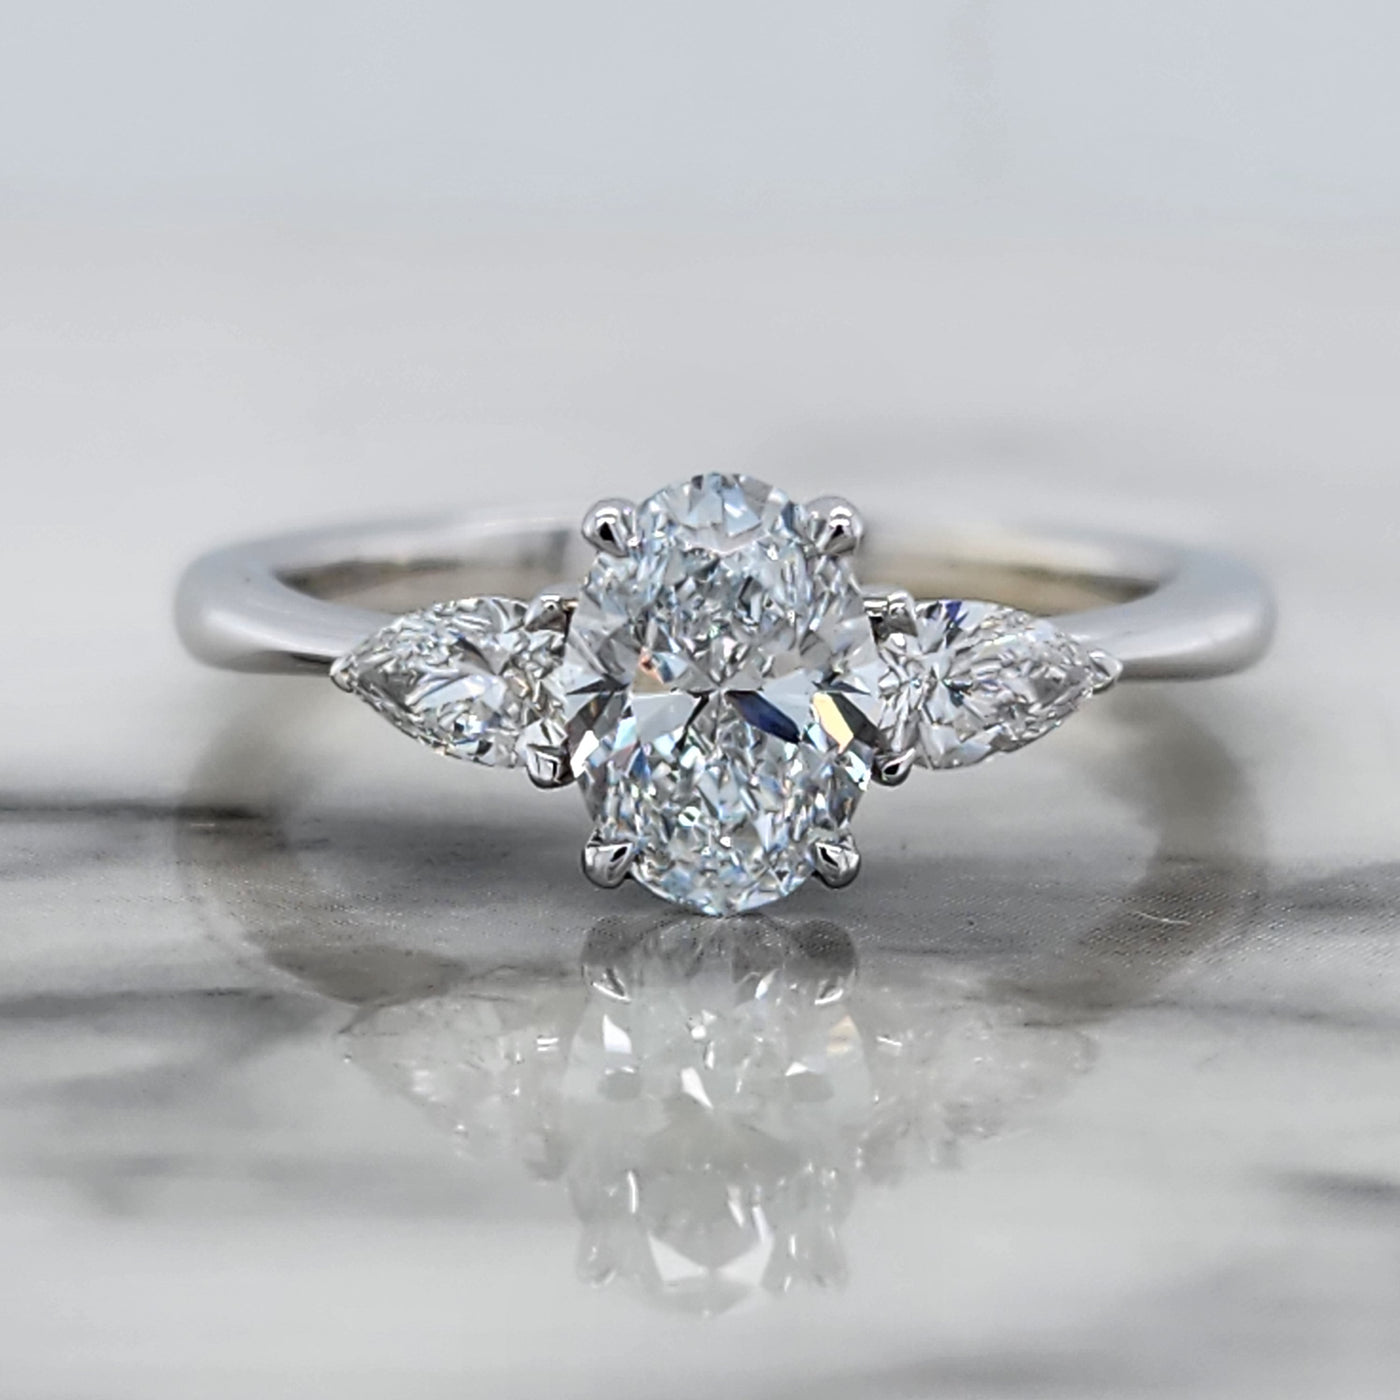 White Gold 3 Stone Engagement Ring With Oval And Pear Shaped Diamonds